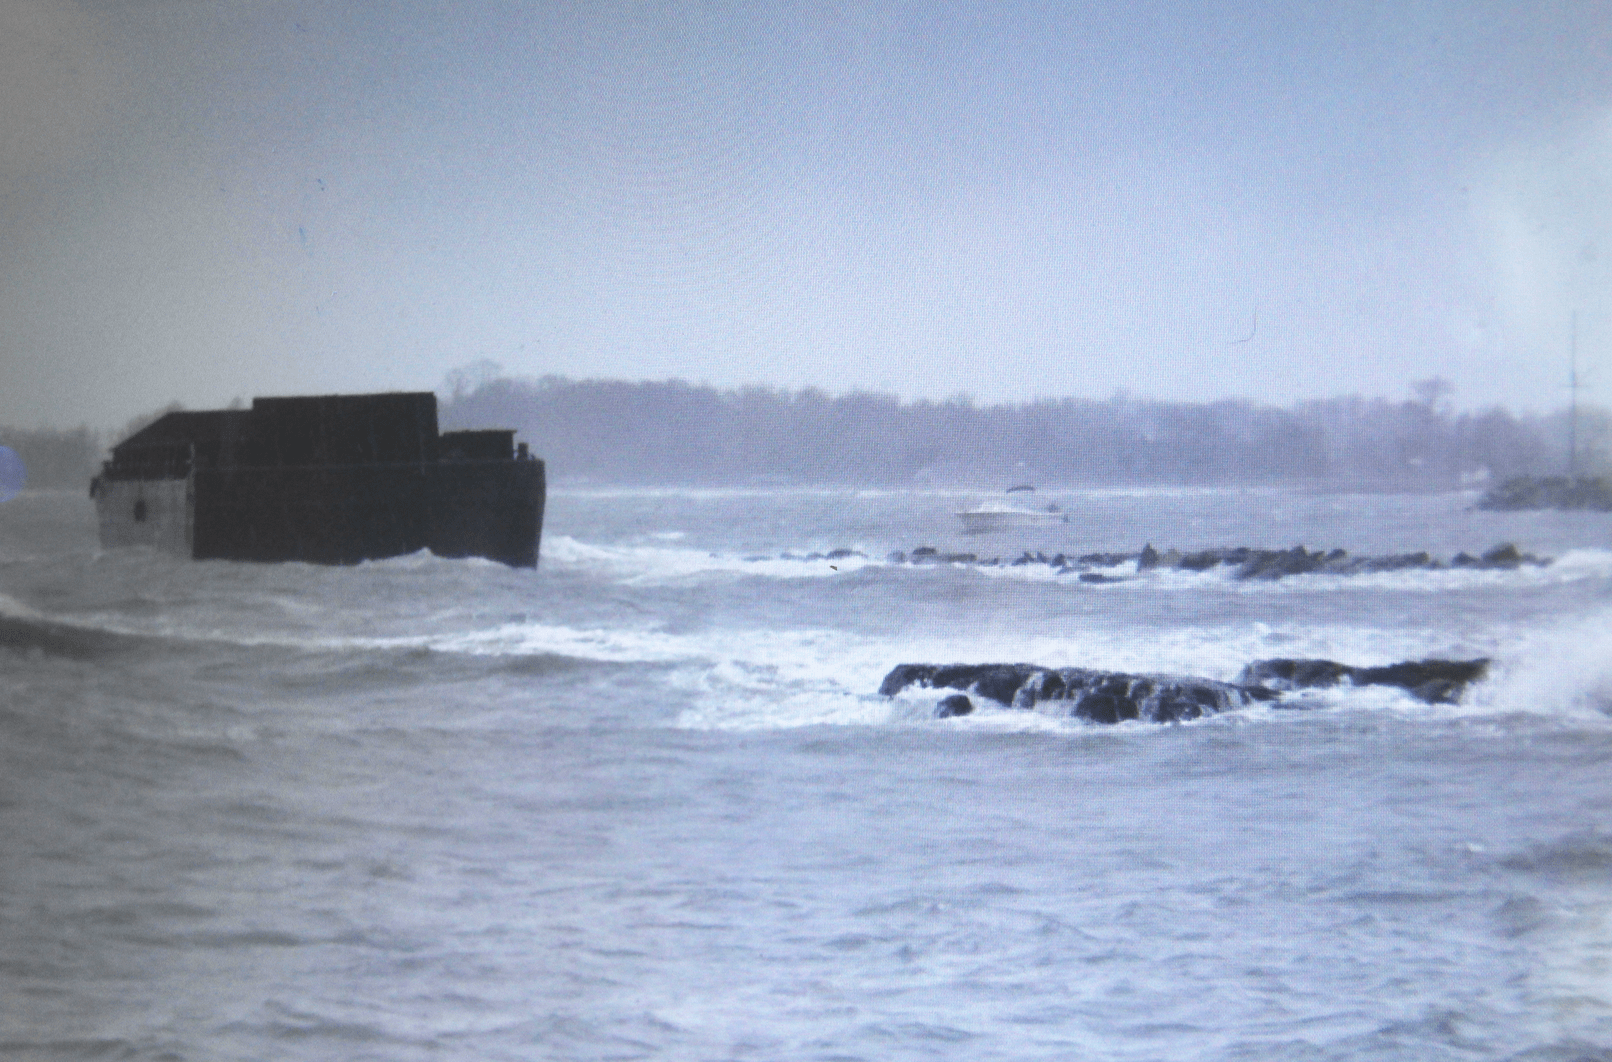 A barge that came loose from its mooring, drifted and got stuck on rocks at Rocky Point in 2014. Photo: Greenwich Harbor Master